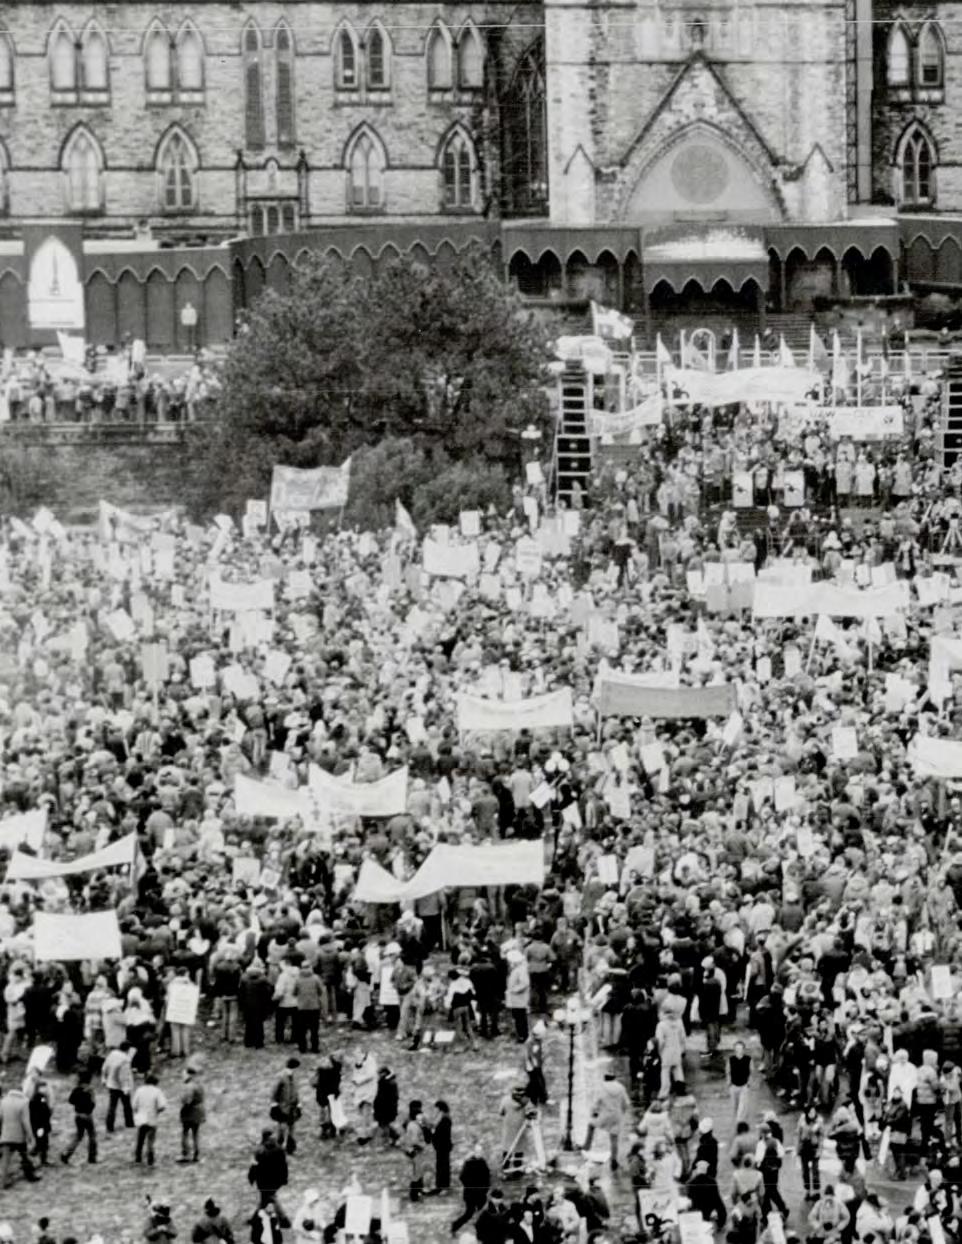 THE LARGEST RALLY IN CANADIAN HISTORY November 21, 1981 / Parliament Hill Ottawa / 100,000+ people